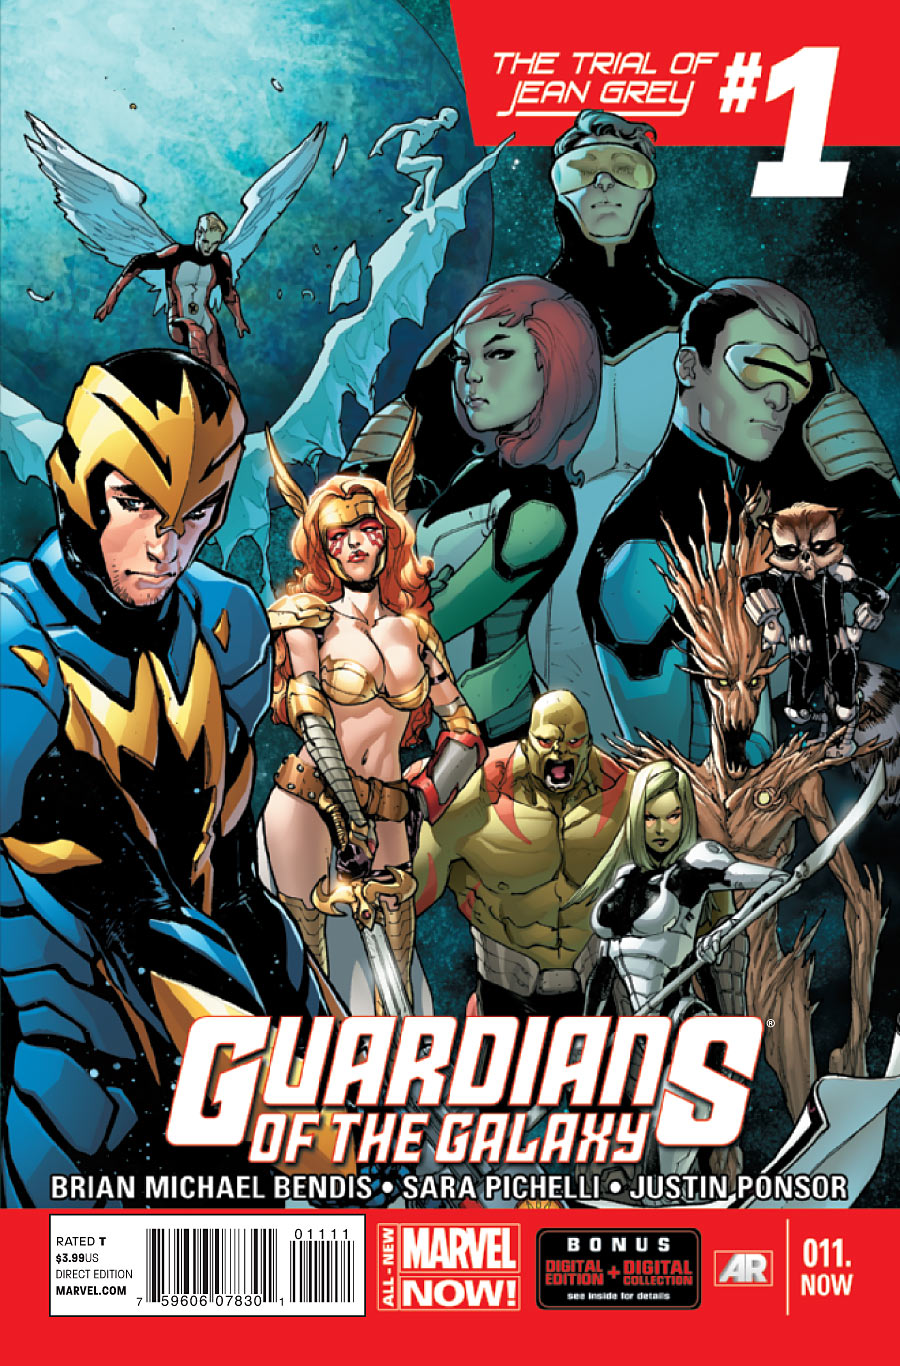 Marvel Comics' Guardians of the Galaxy #3 says goodbye to Star